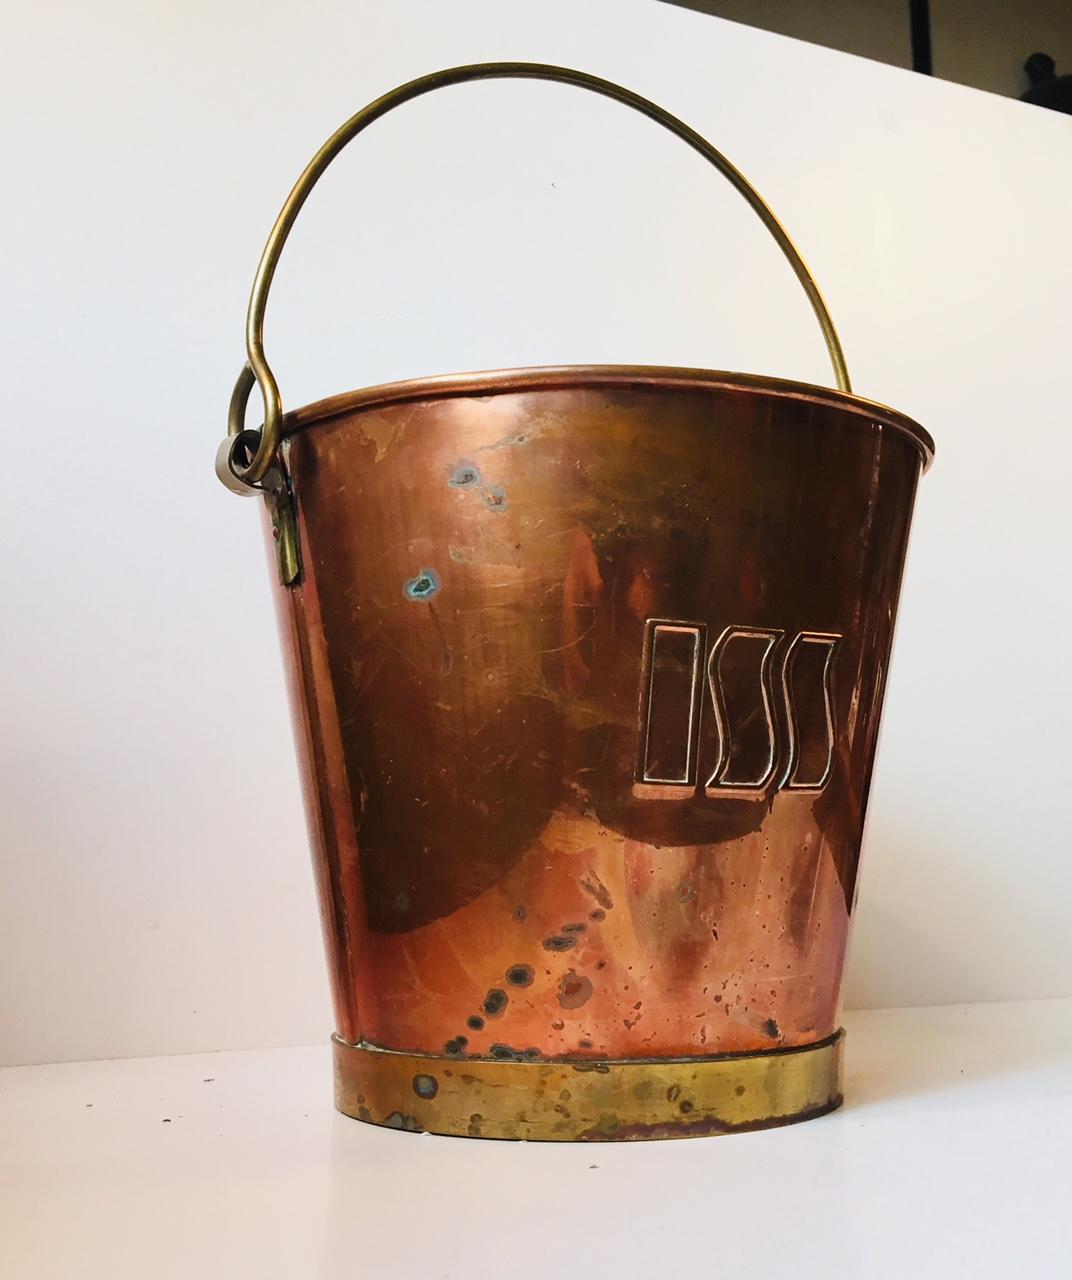 Large champagne ice bucket fashioned out of copper and brass. The interior is plated with white metal. The bucket is stamped Darlin to the base and is was commissioned by the Danish Company ISS who operates out of Copenhagen and specializes in